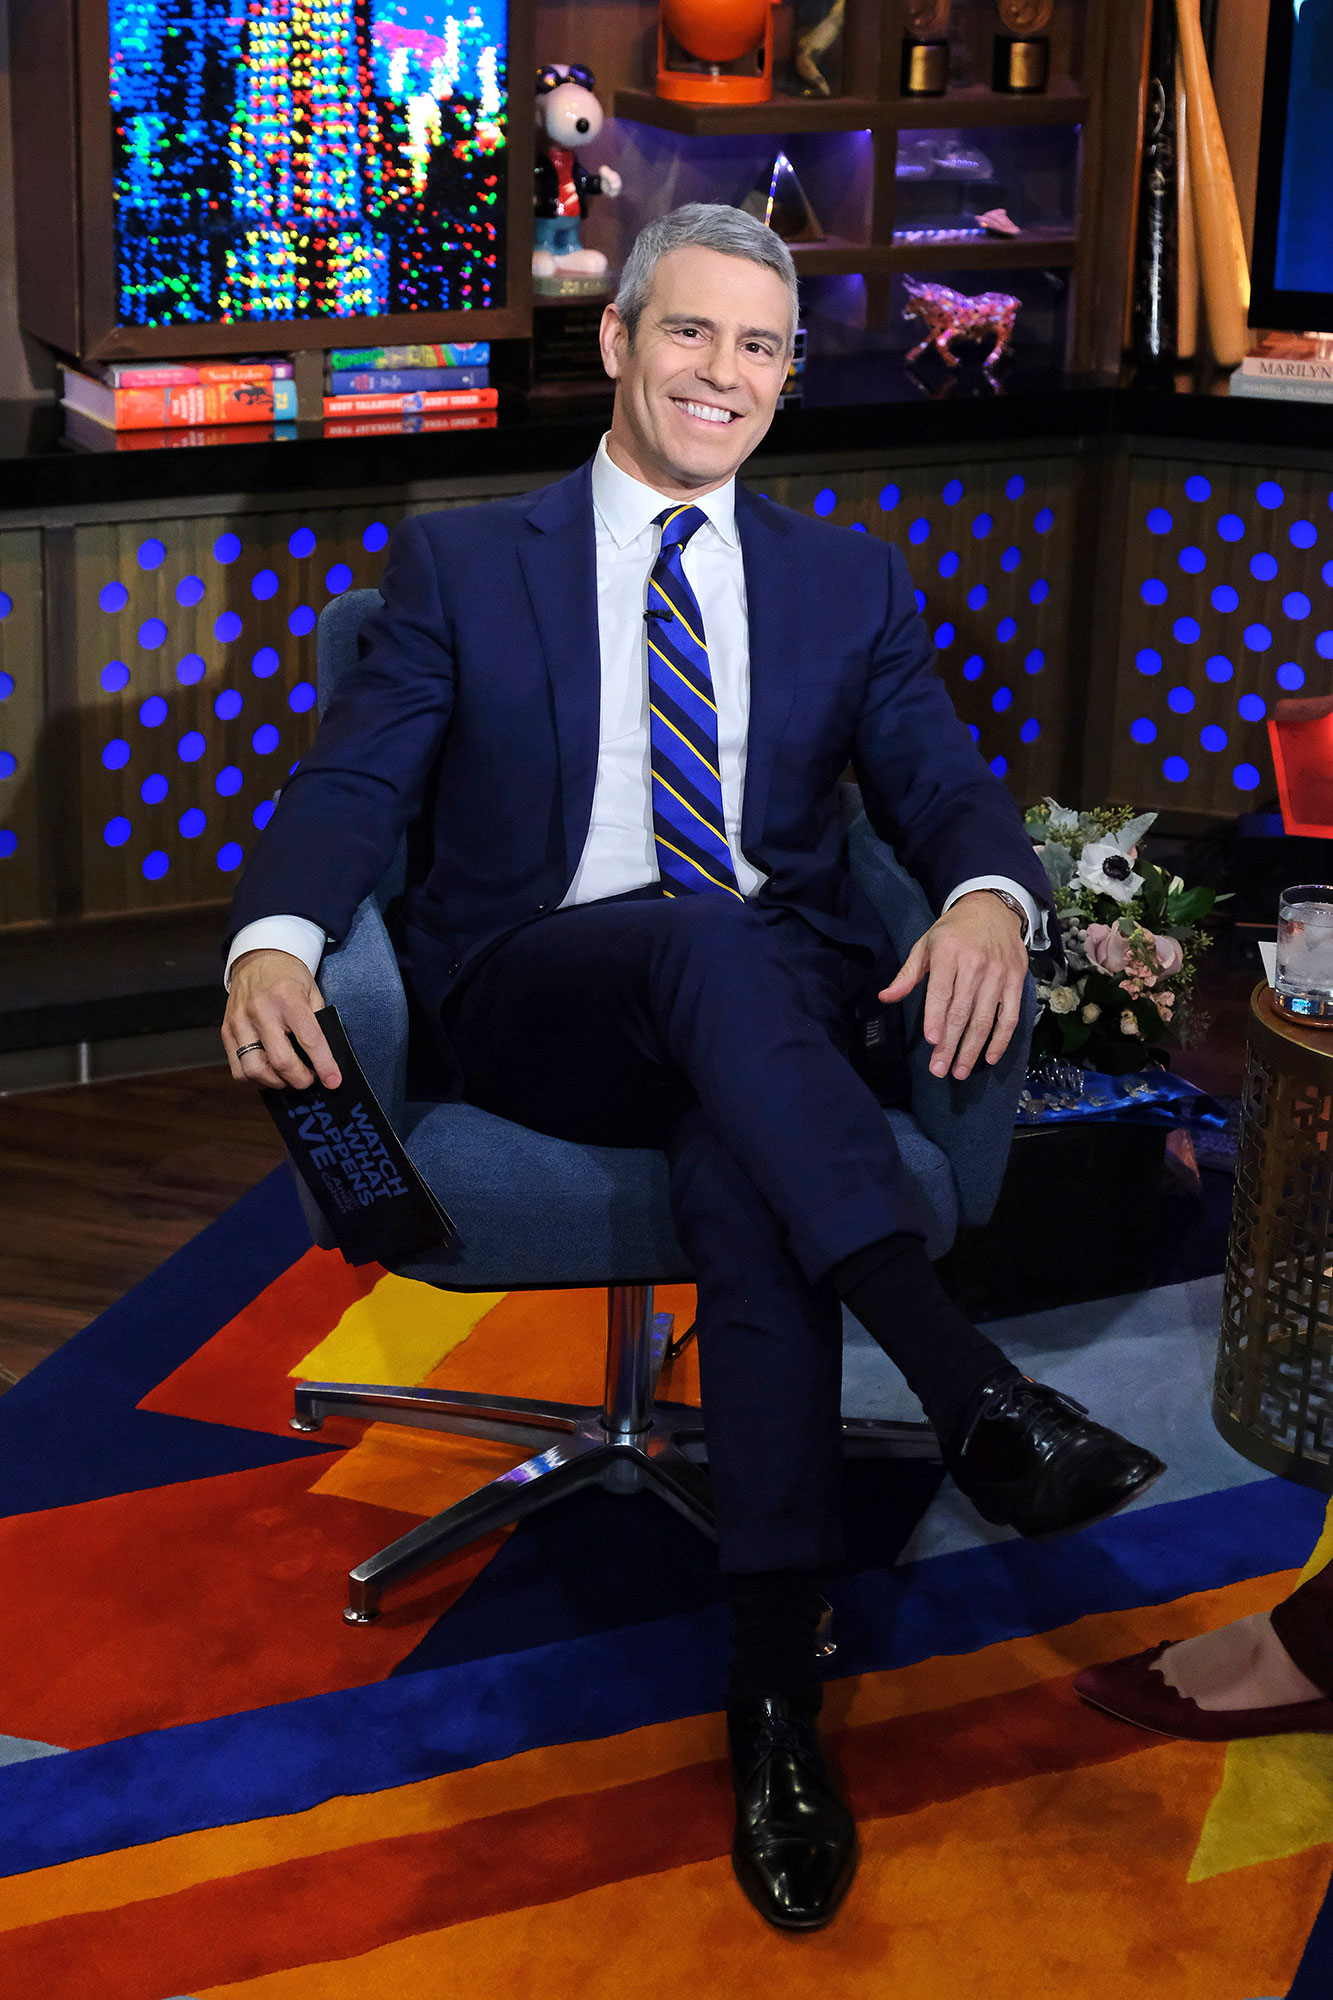 Andy Cohen Friendship With Former Housewives Who Is He Still on Good Terms With